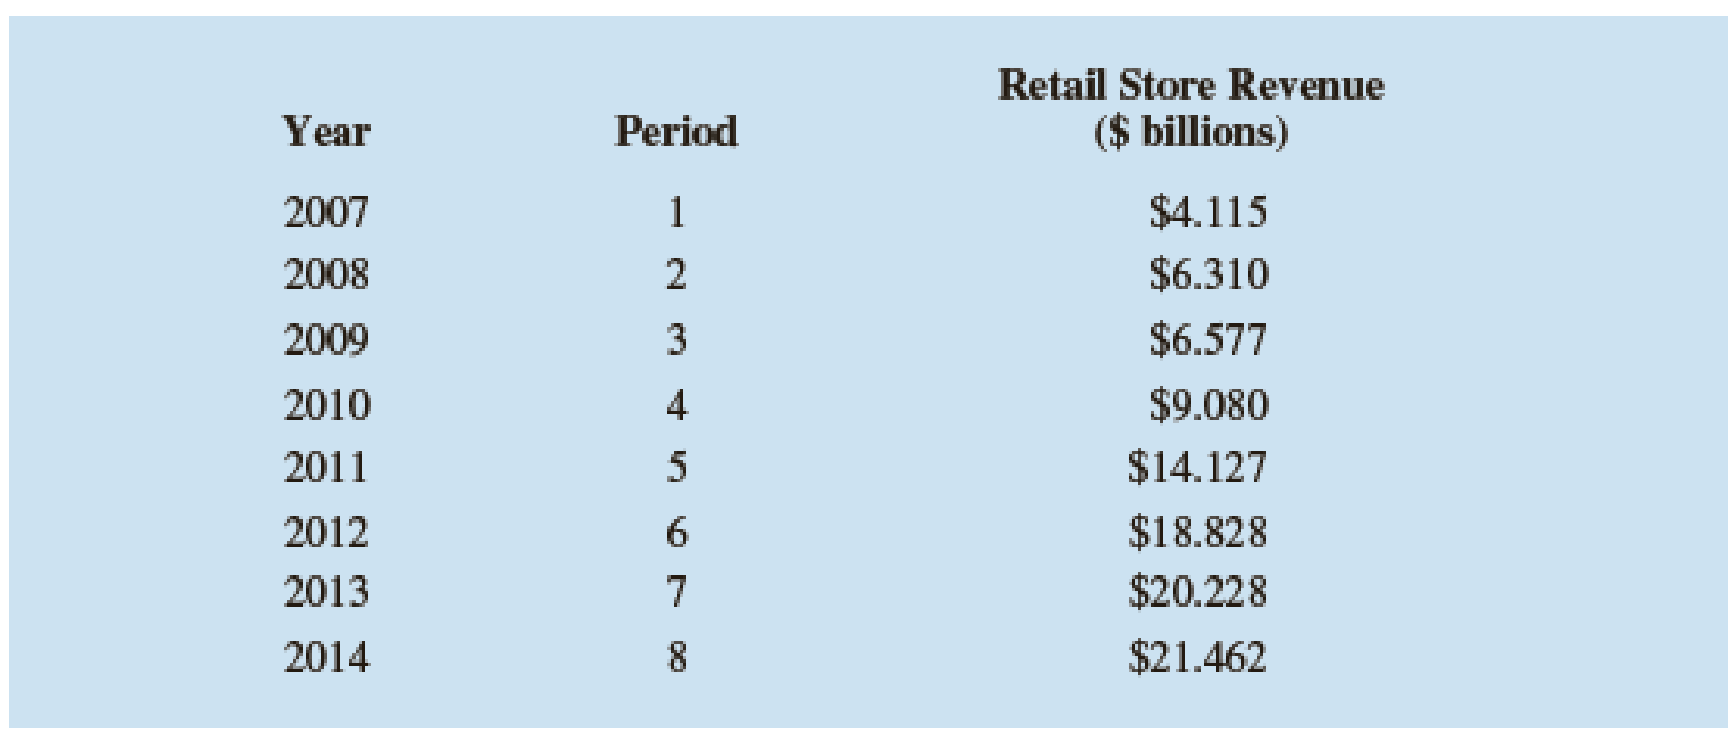 Chapter 17, Problem 45SE, Annual retail store revenue for Apple from 2007 to 2014 are shown below (source: 